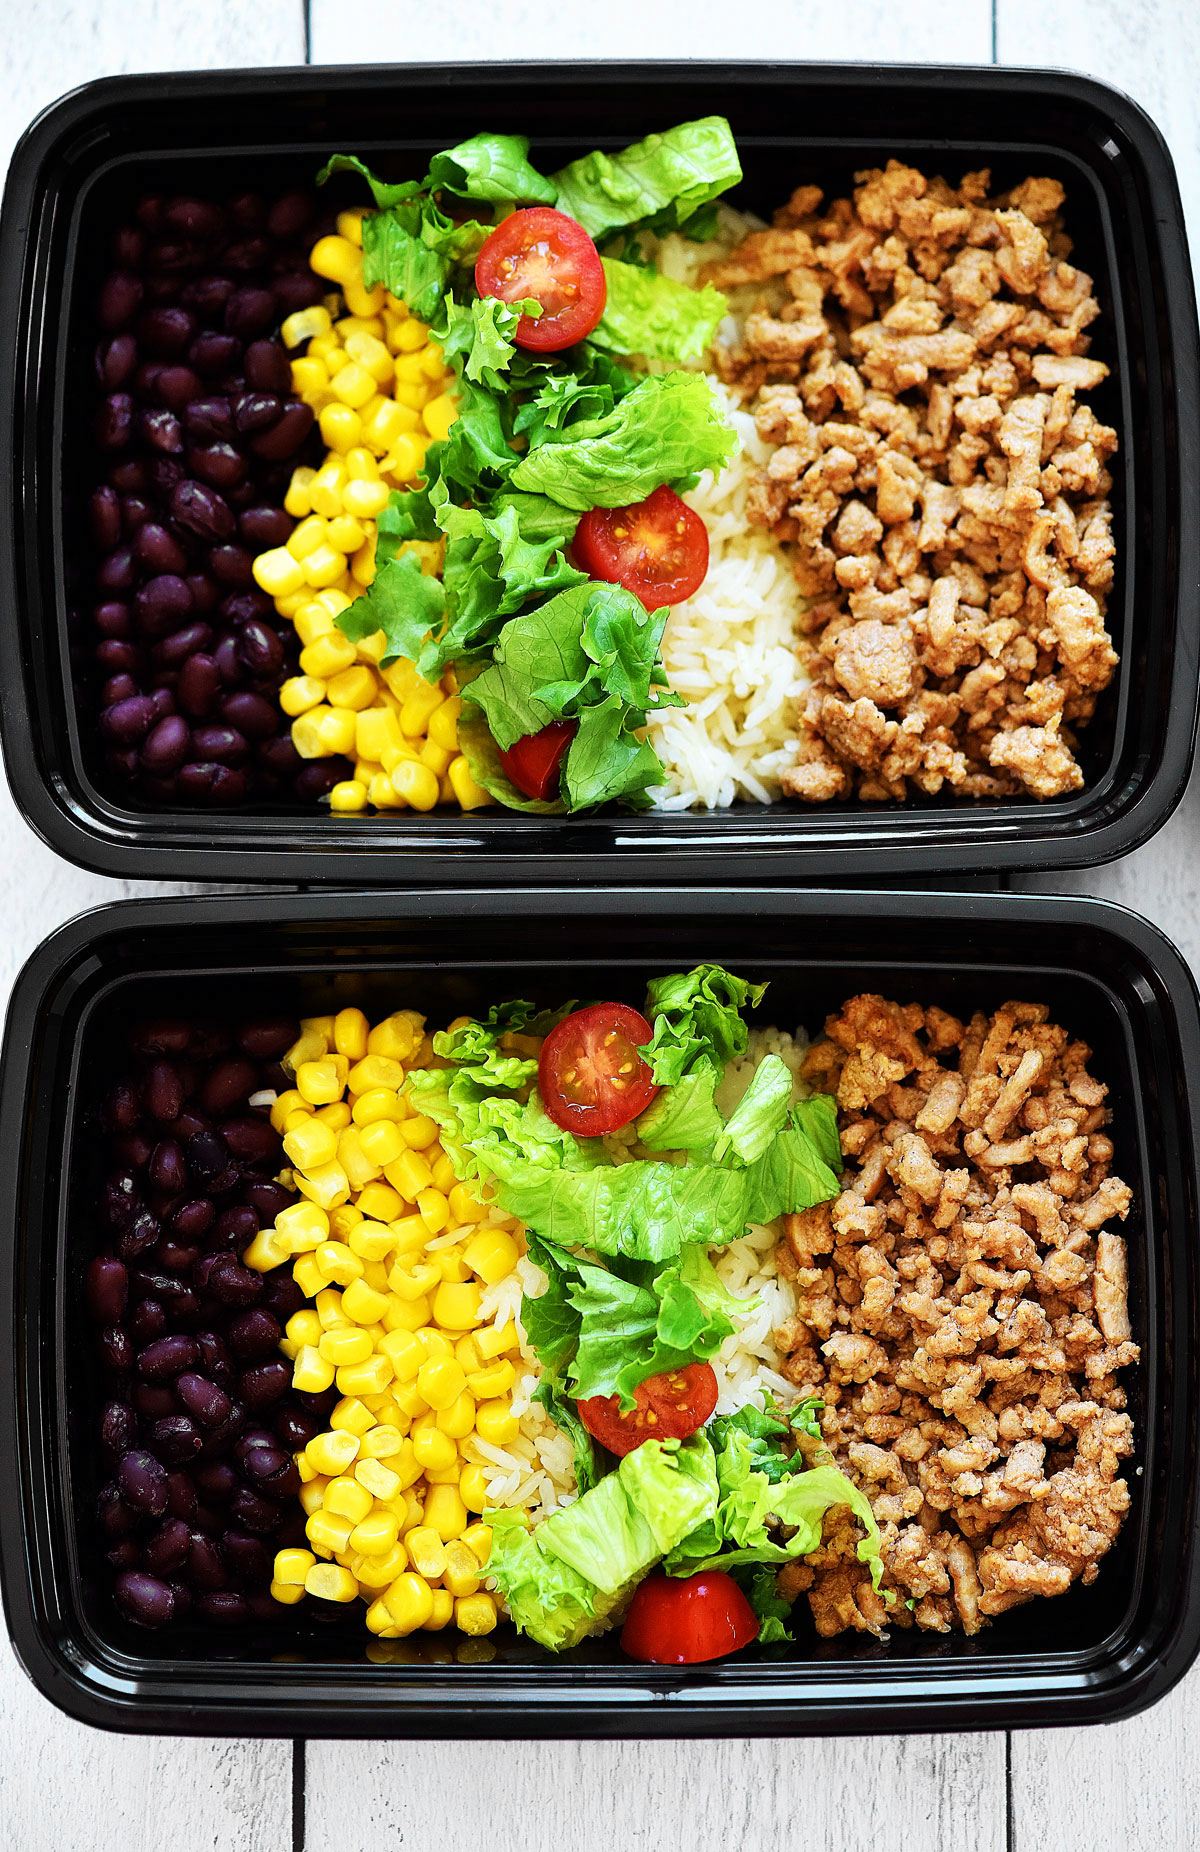 https://life-in-the-lofthouse.com/wp-content/uploads/2020/06/Meal-Prep-Taco-Salad-Bowls1.jpg